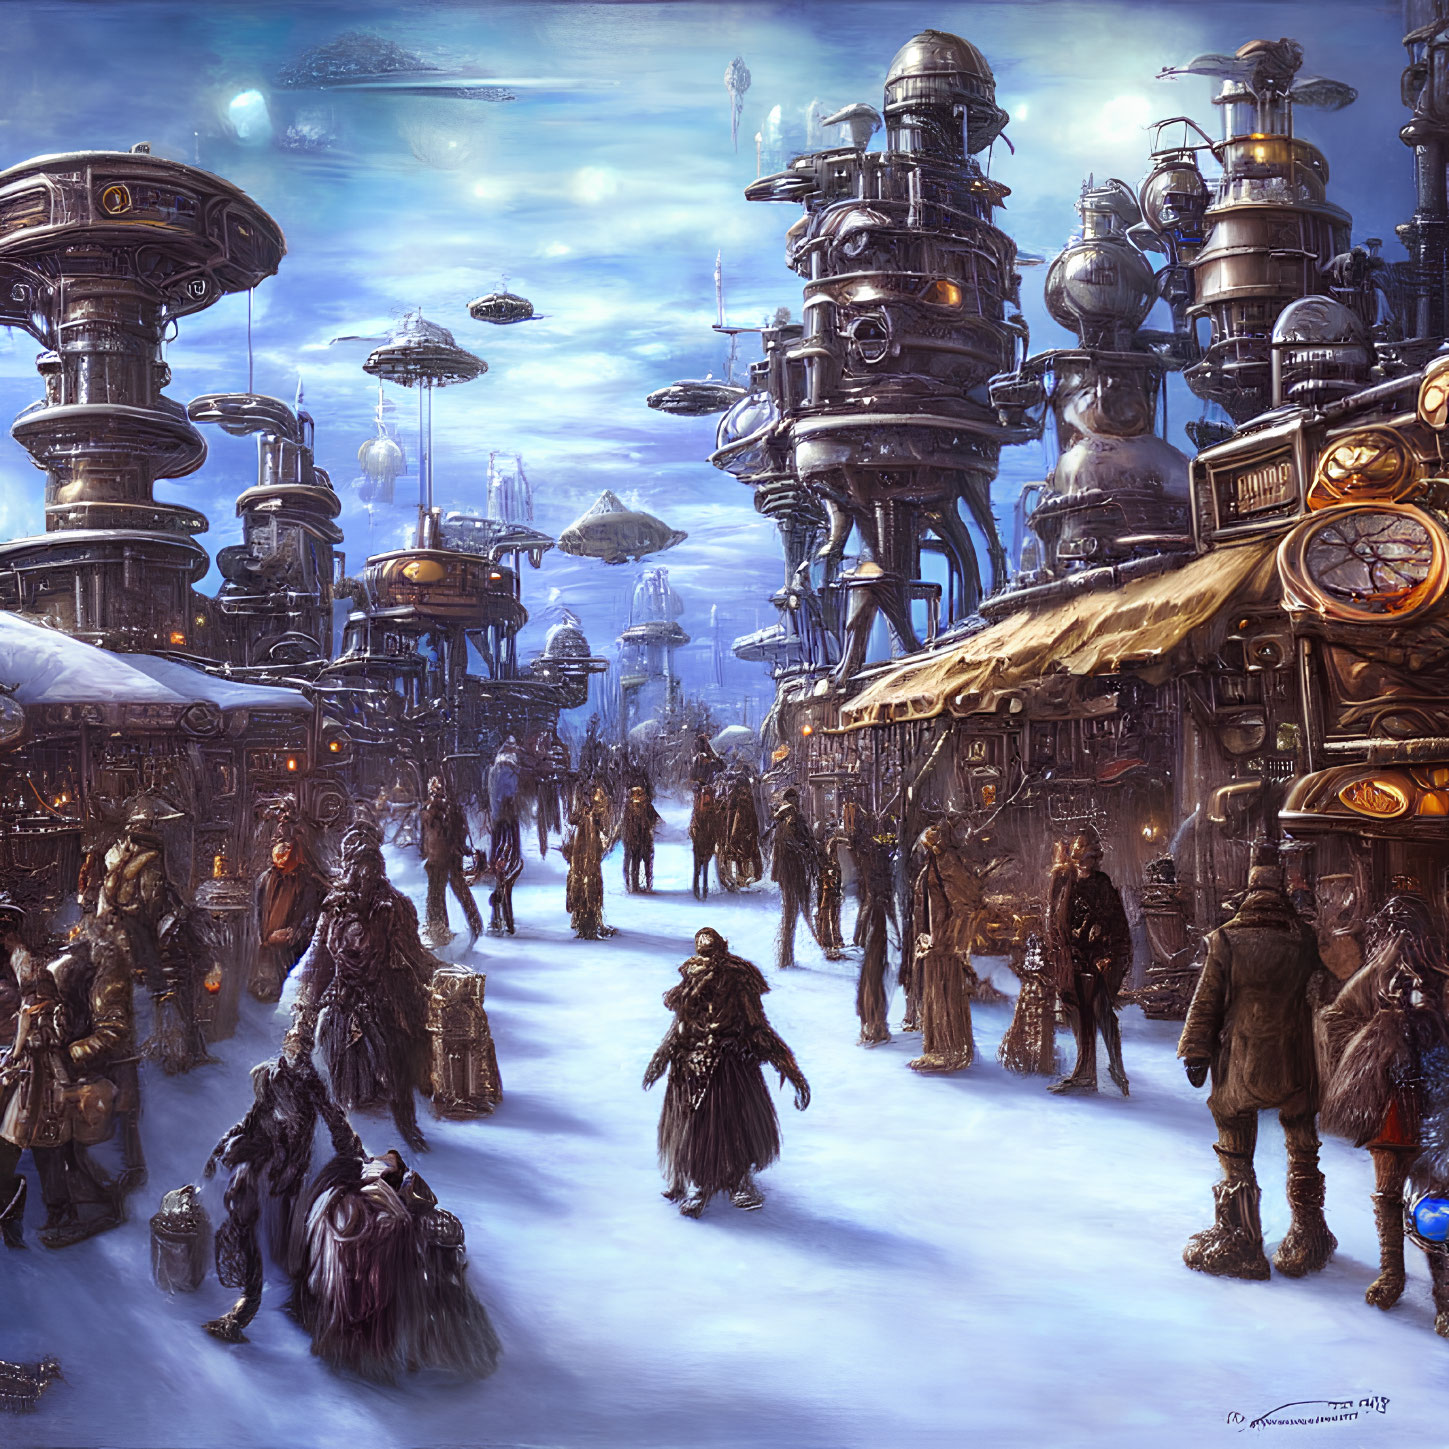 Steampunk Victorian cityscape with airships and industrial buildings.